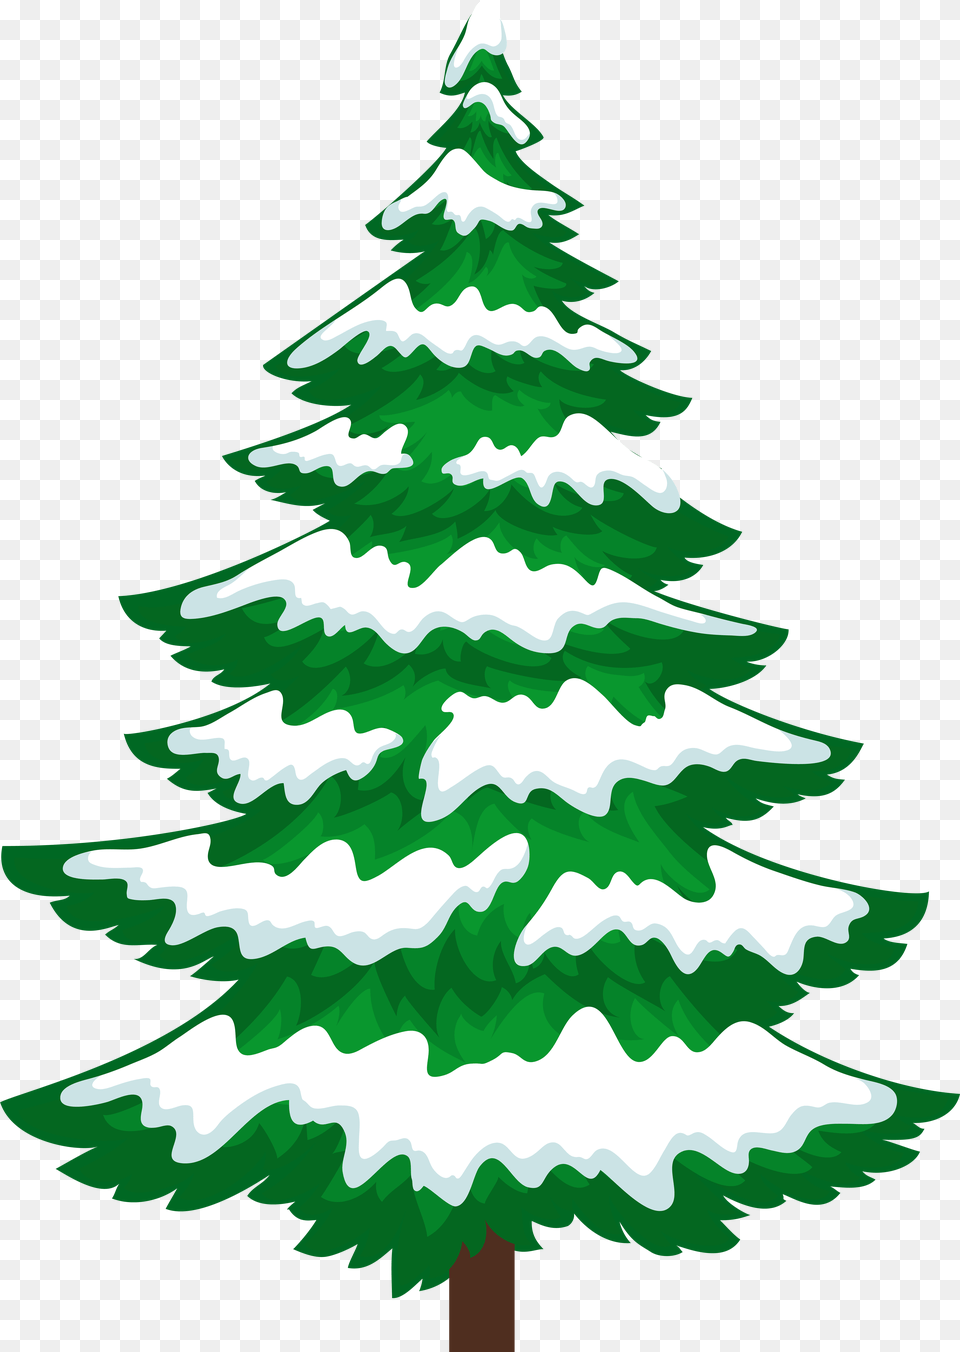 Library Of Pine Tree Clip Art Freeuse Download Transparent Snowy Christmas Tree Clipart, Plant, Fir, Christmas Decorations, Festival Png